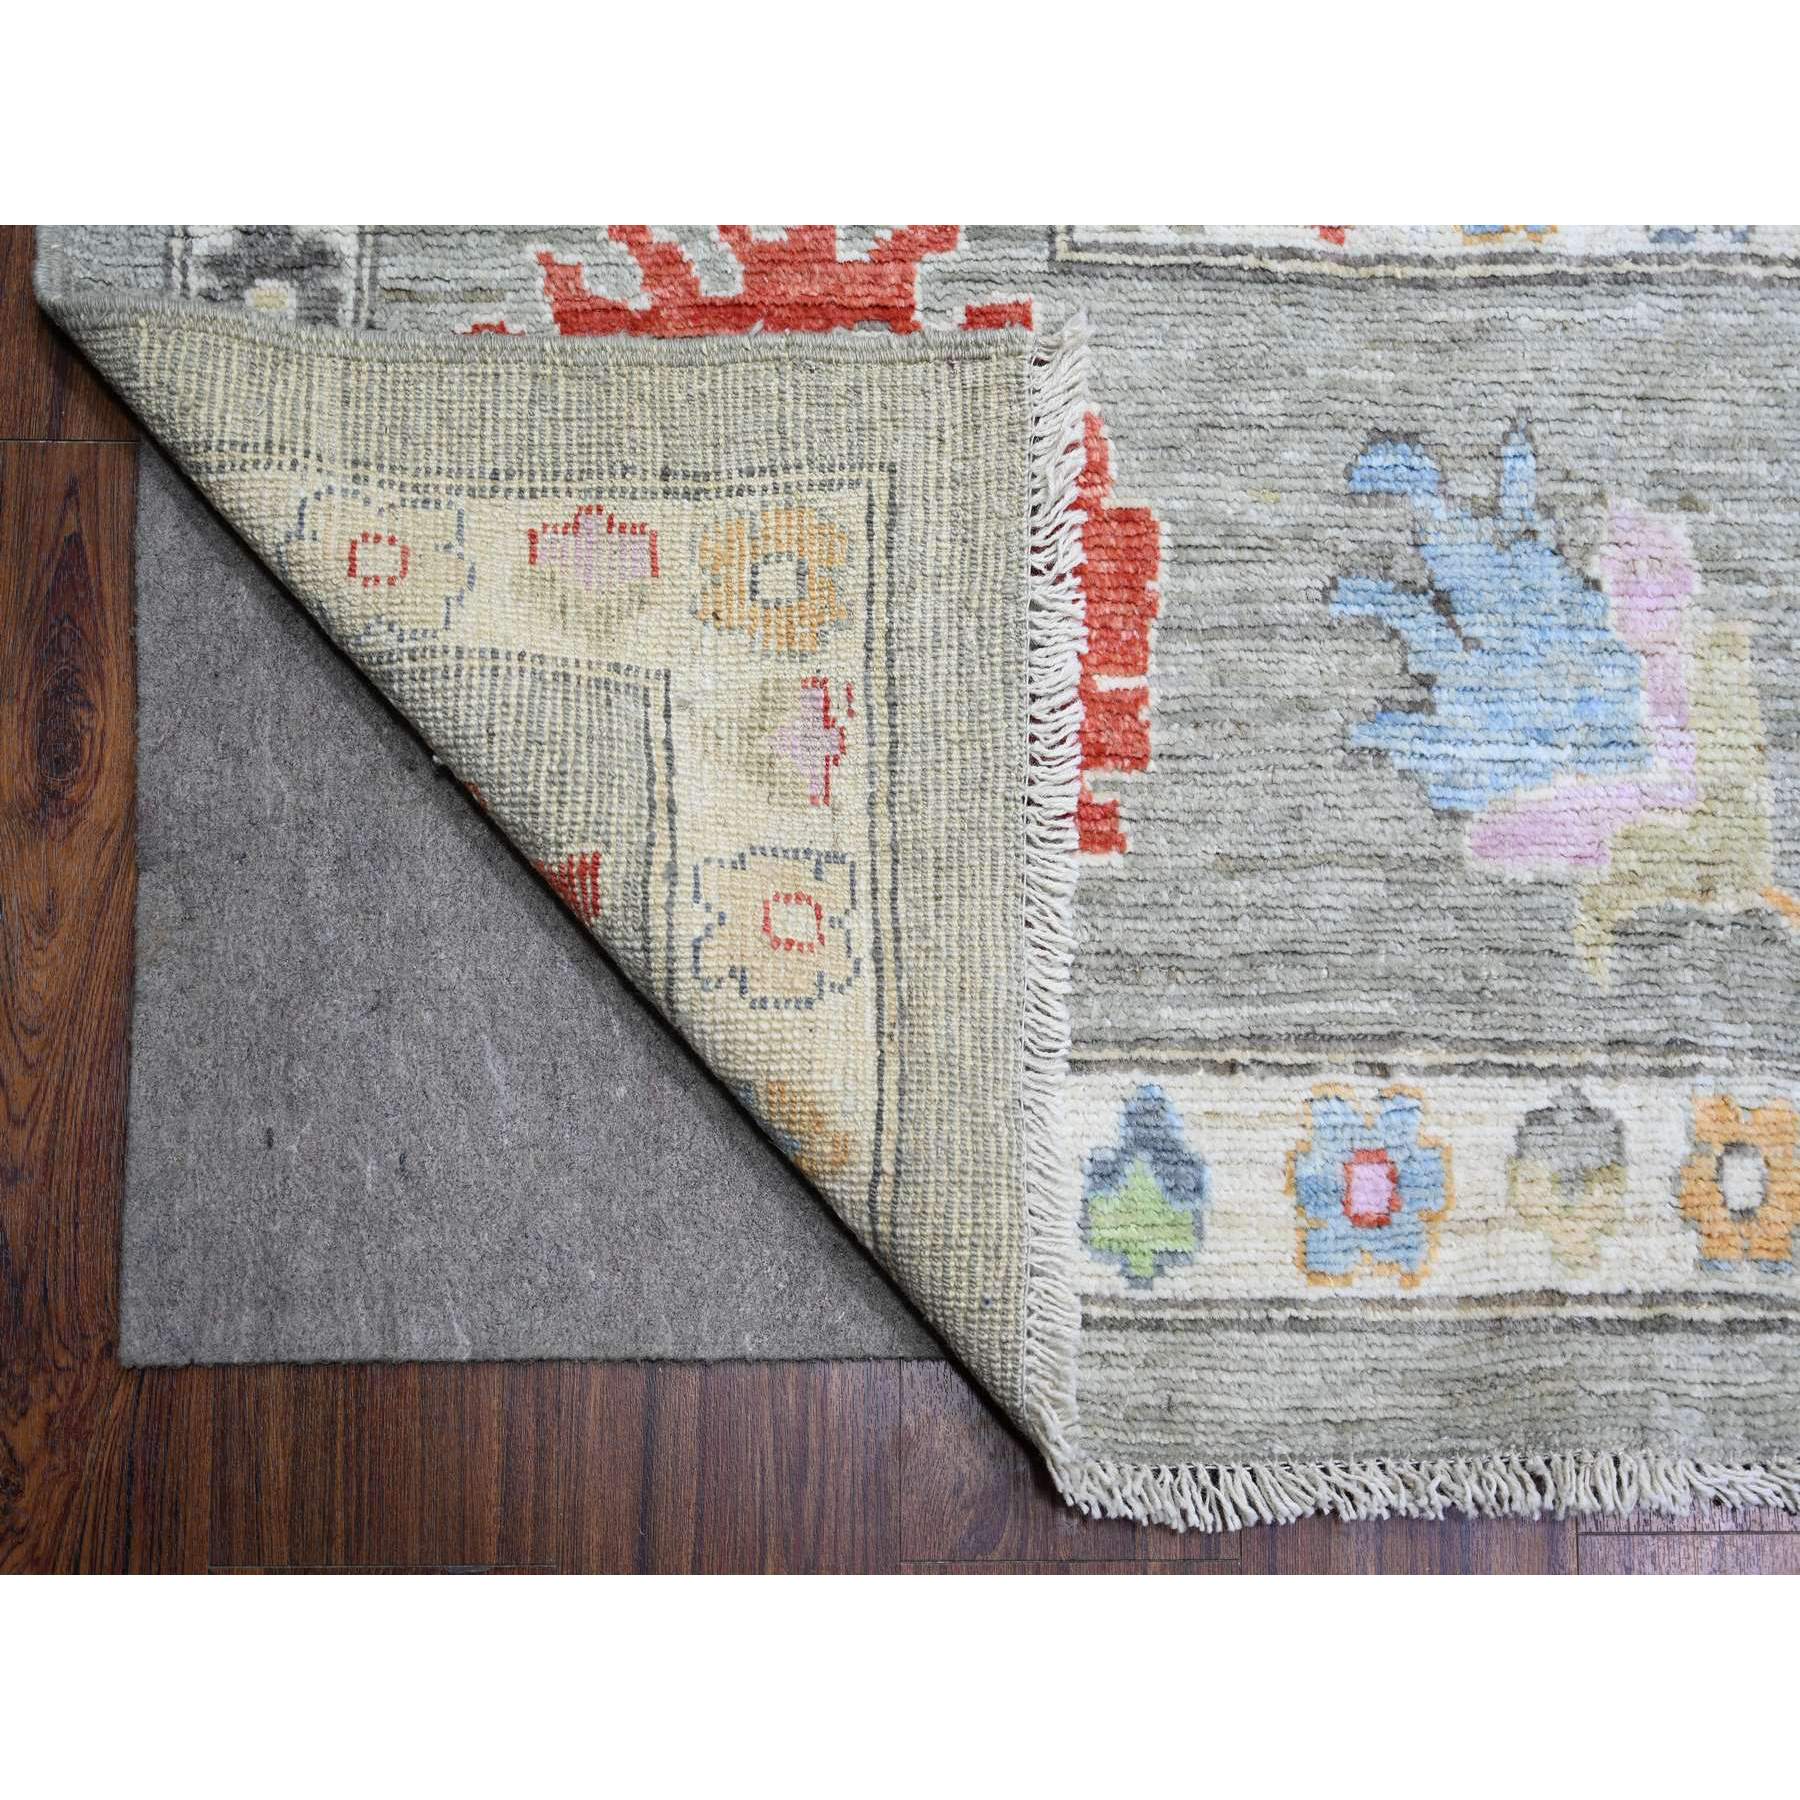 12'x15'8" Cloud Gray, Hand Woven Extra Soft Wool, Natural Dyes Afghan Angora Oushak with Colorful Motifs, Oversized Oriental Rug 